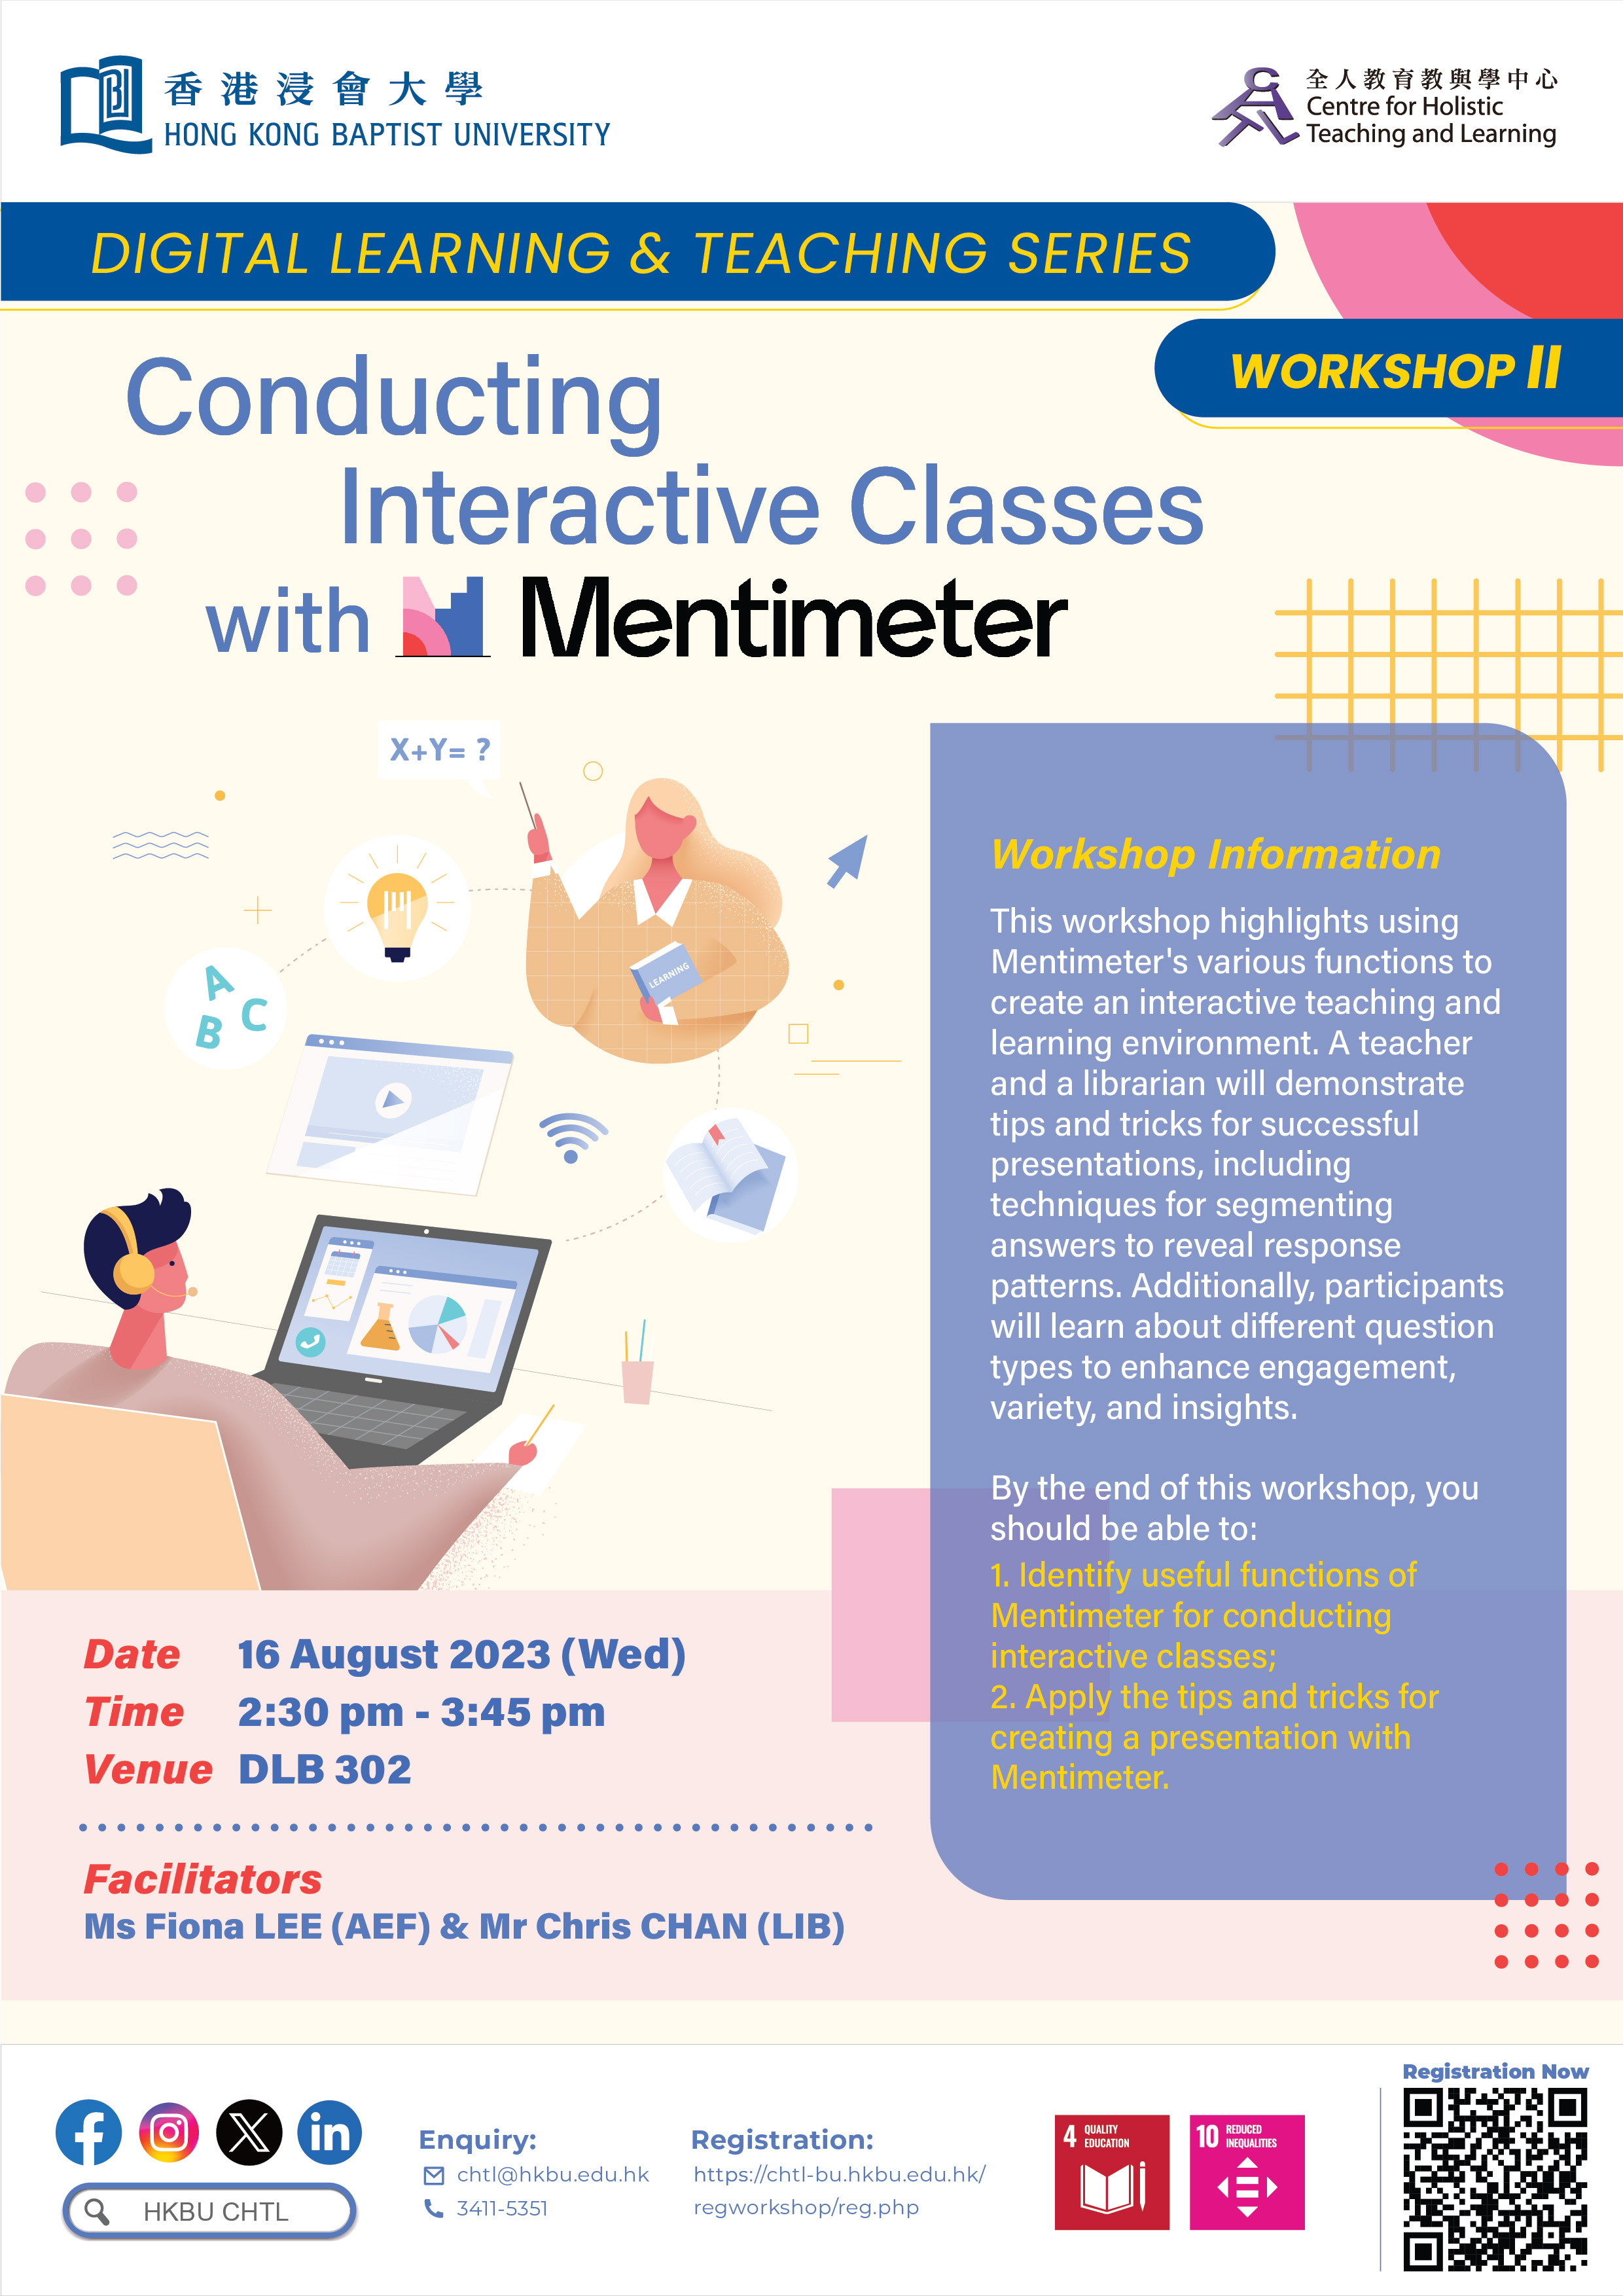 Workshop II: Conducting Interactive Classes with Mentimeter